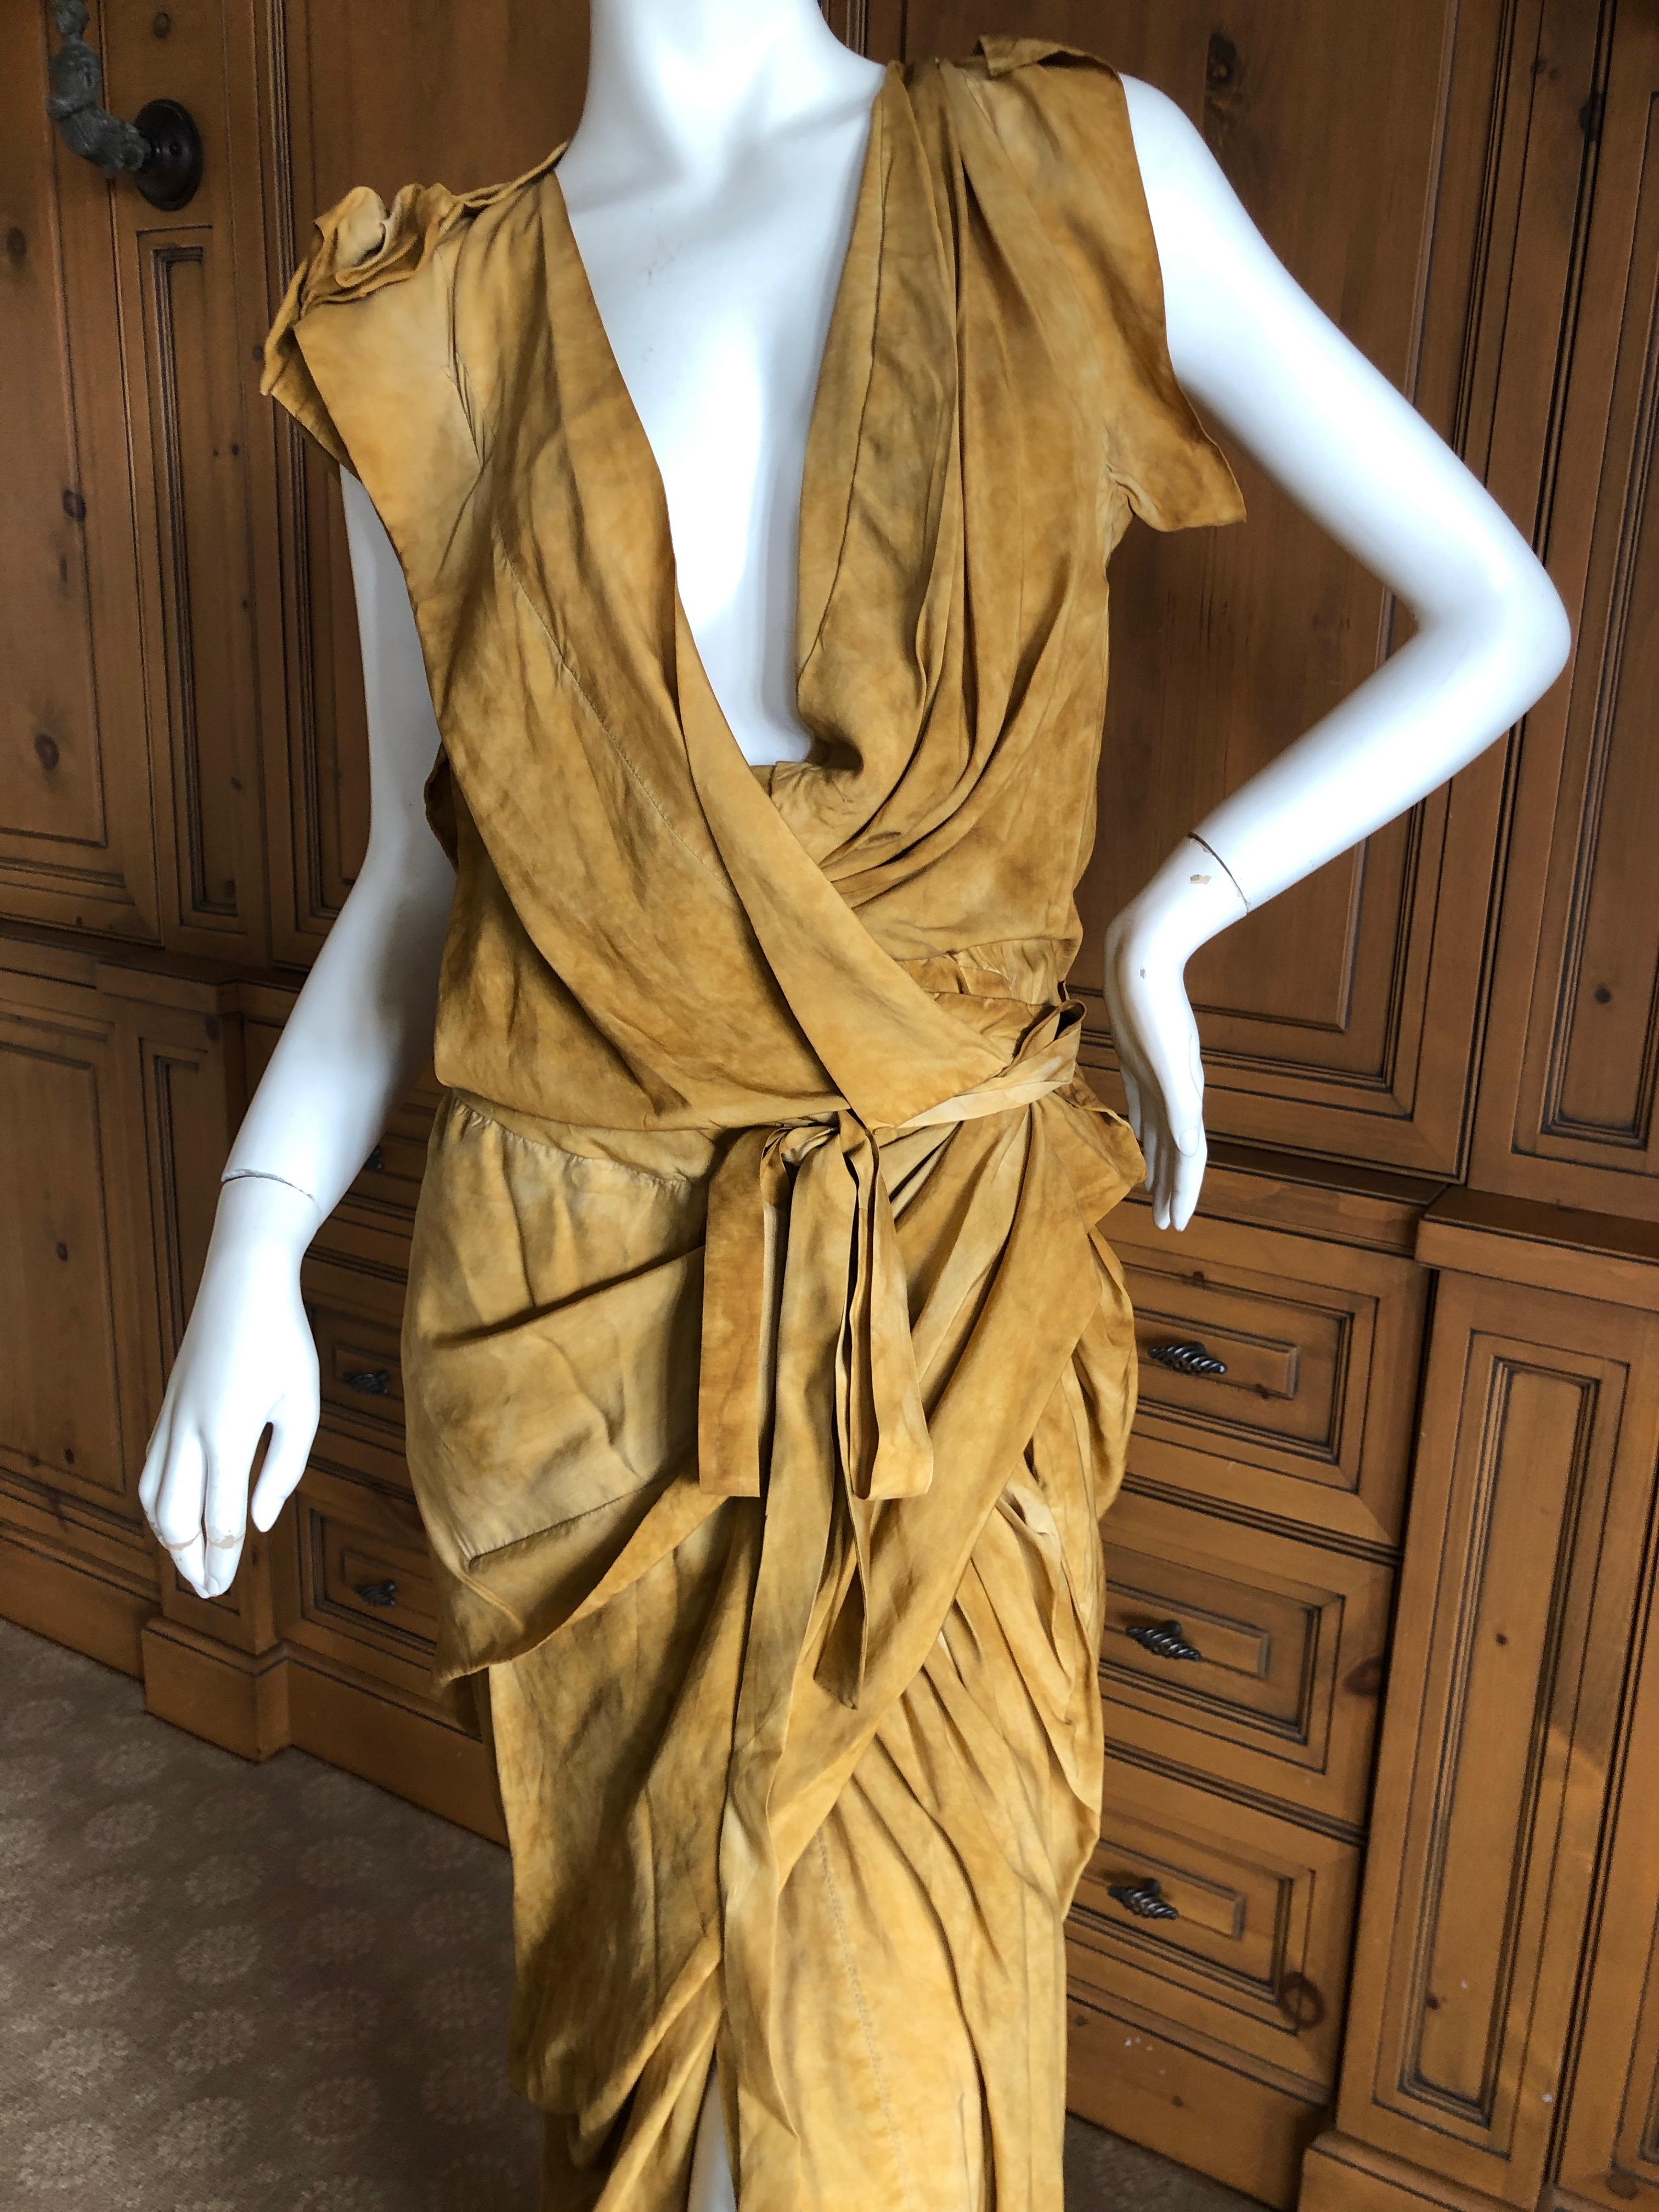 Vivienne Westwood 2012 Gold Label Draped Goddess Dress
.Size 10 UK
 New with Tags 
This is such a charming piece, sort of tie dye pattern in an ochre mustard gold
Bust  38